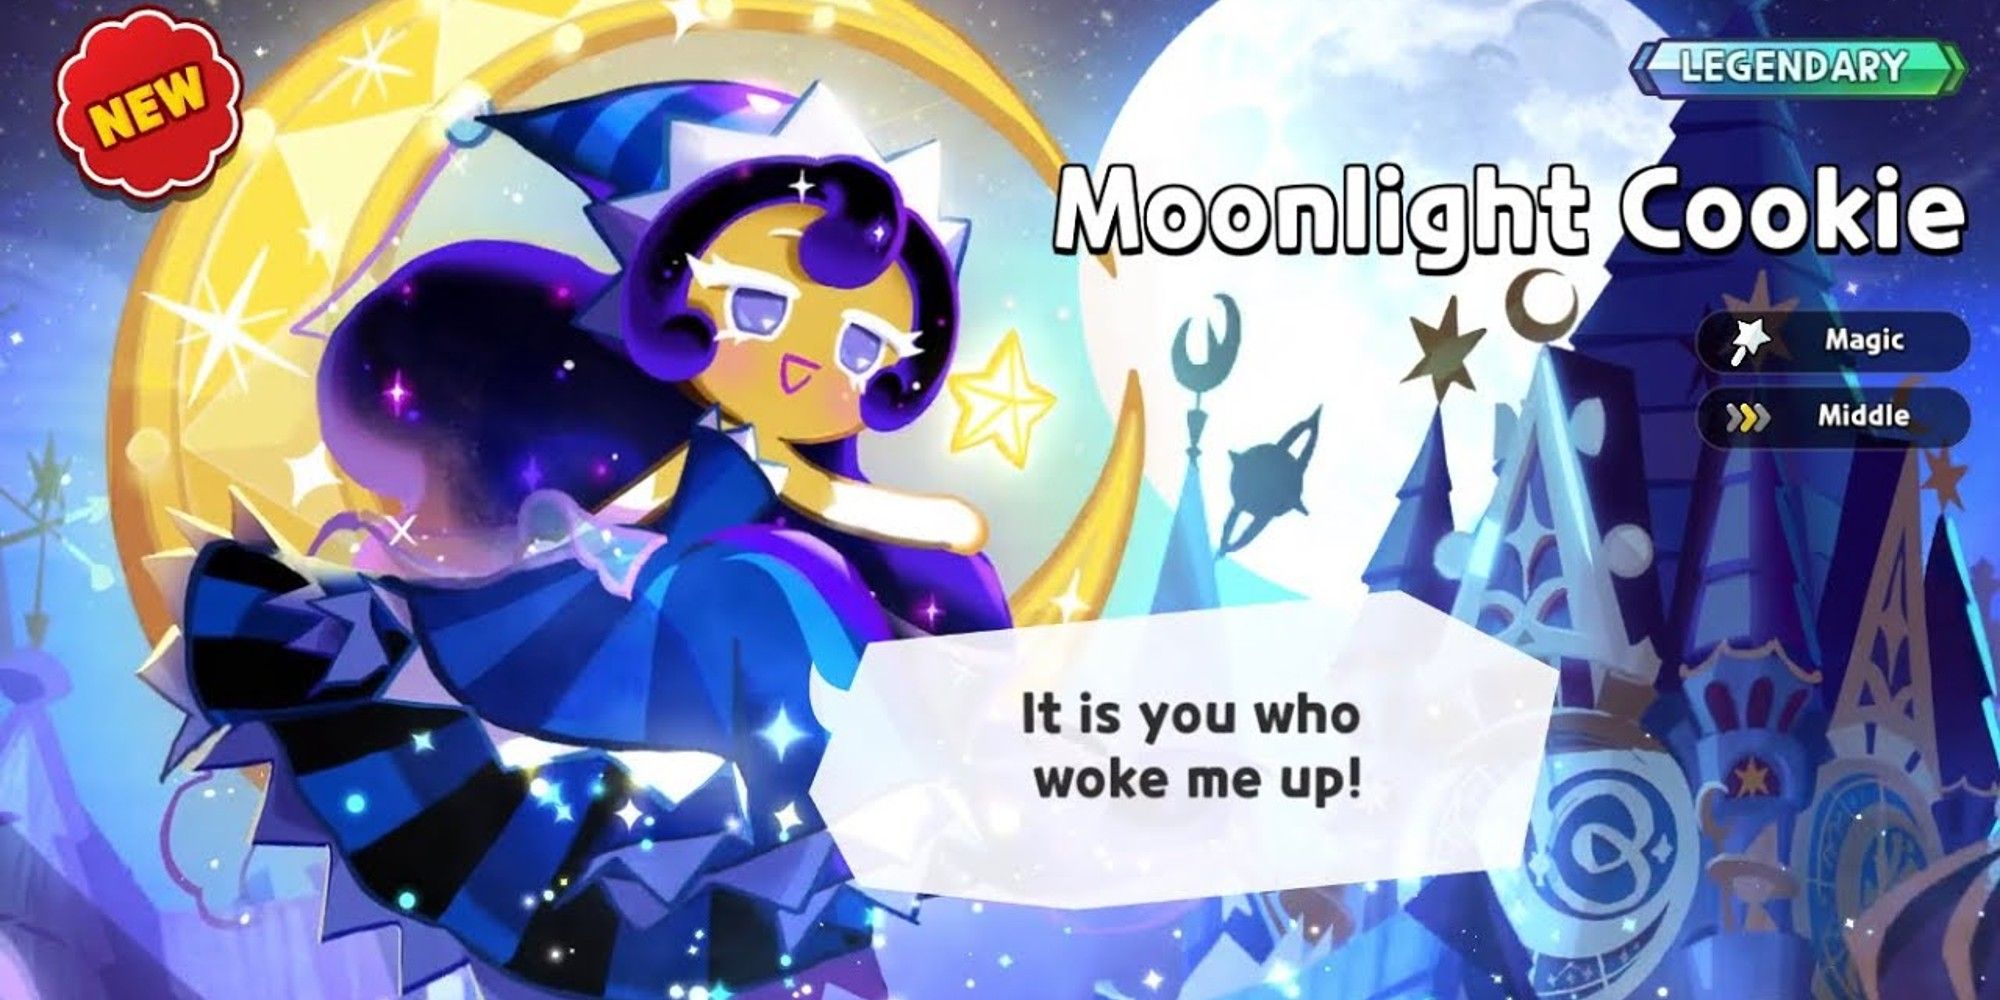 Moonlight Cookie awoke anew from her slumber